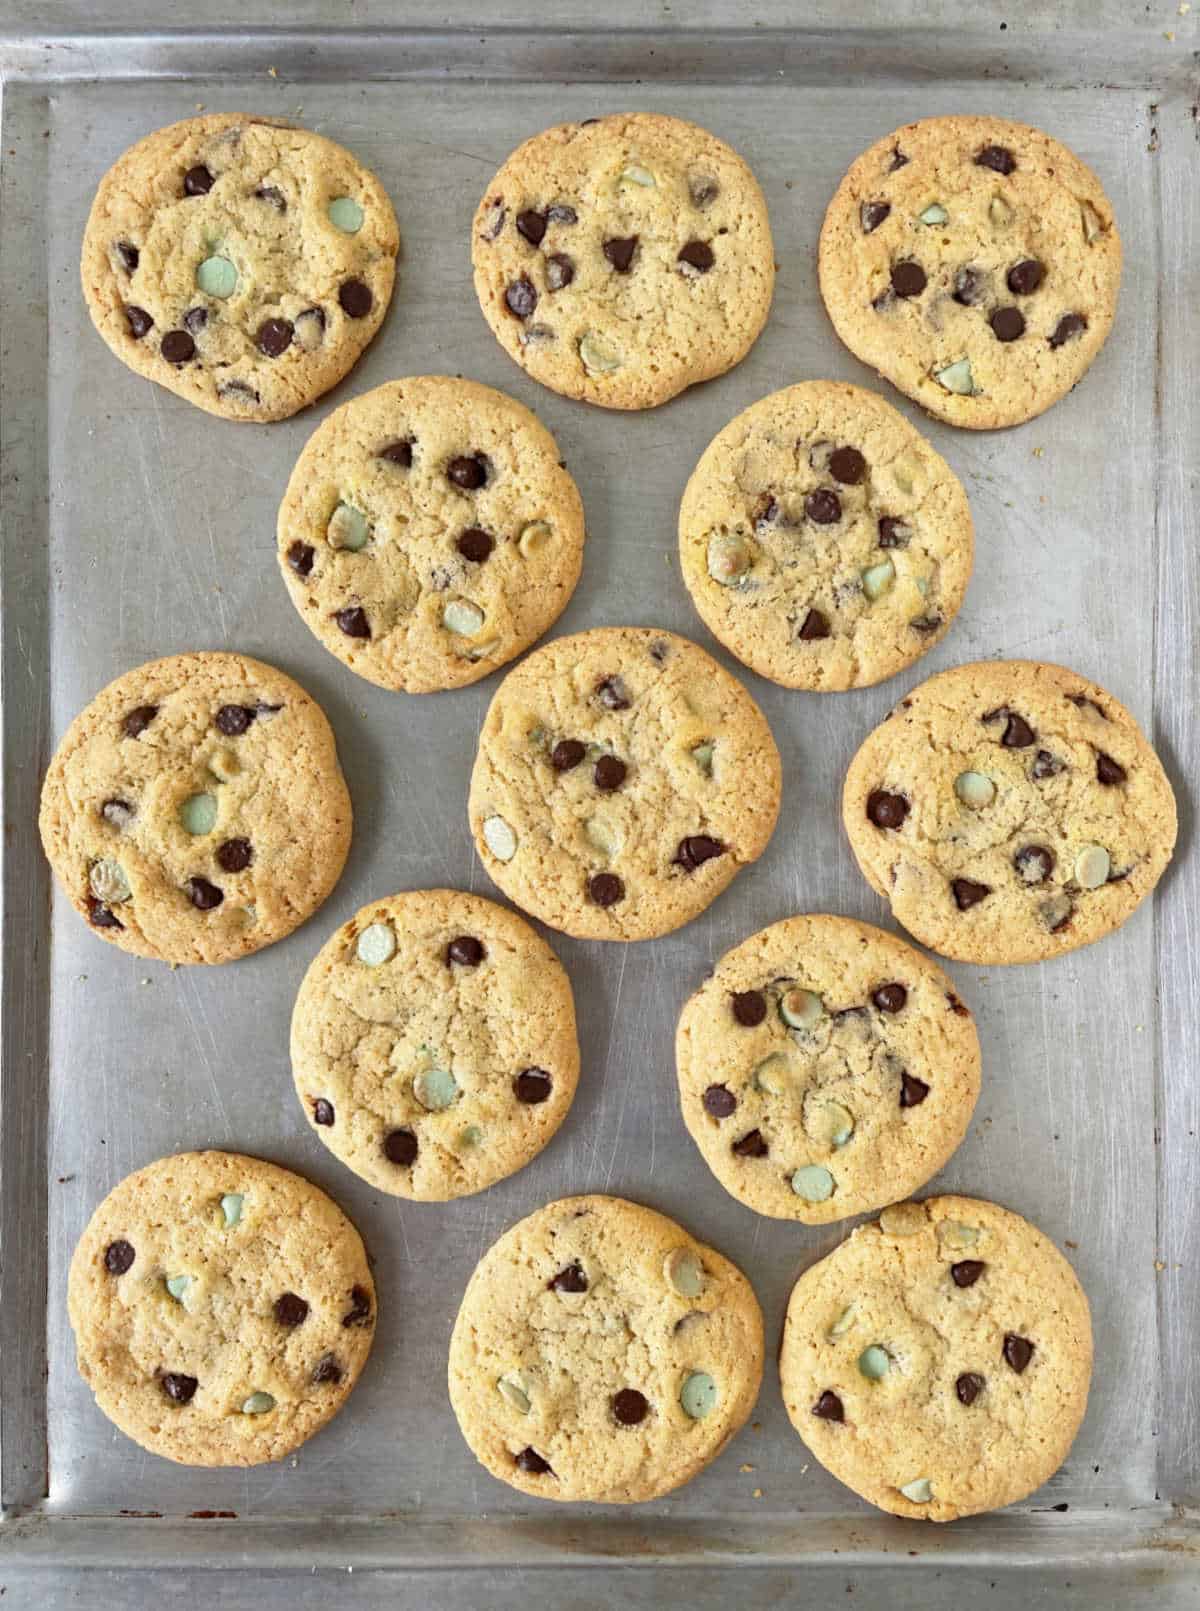 Baked mint chocolate chip cookies on metal cookie sheet, top view.